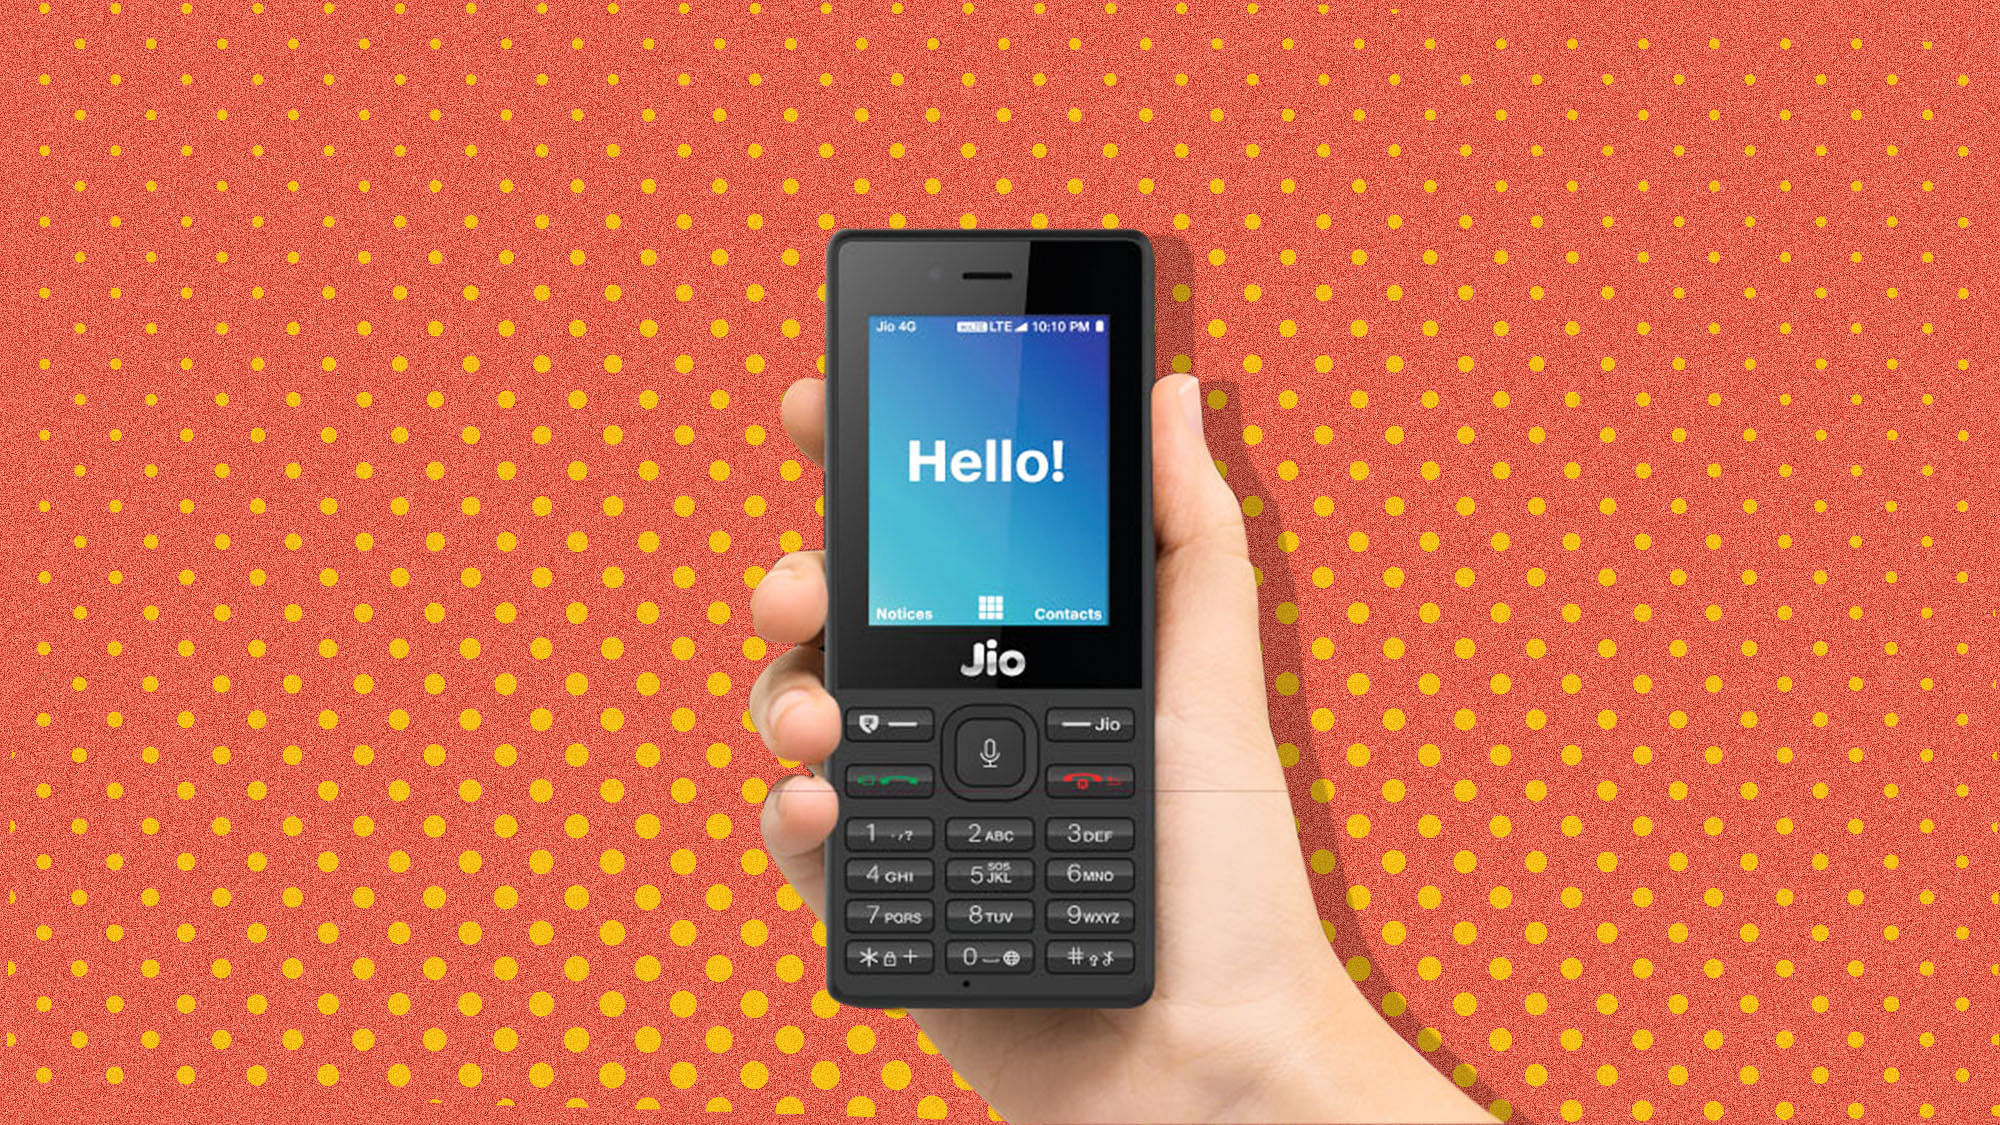 JioPhone 4G VoLTE feature phone is on its way to the buyers.&nbsp;